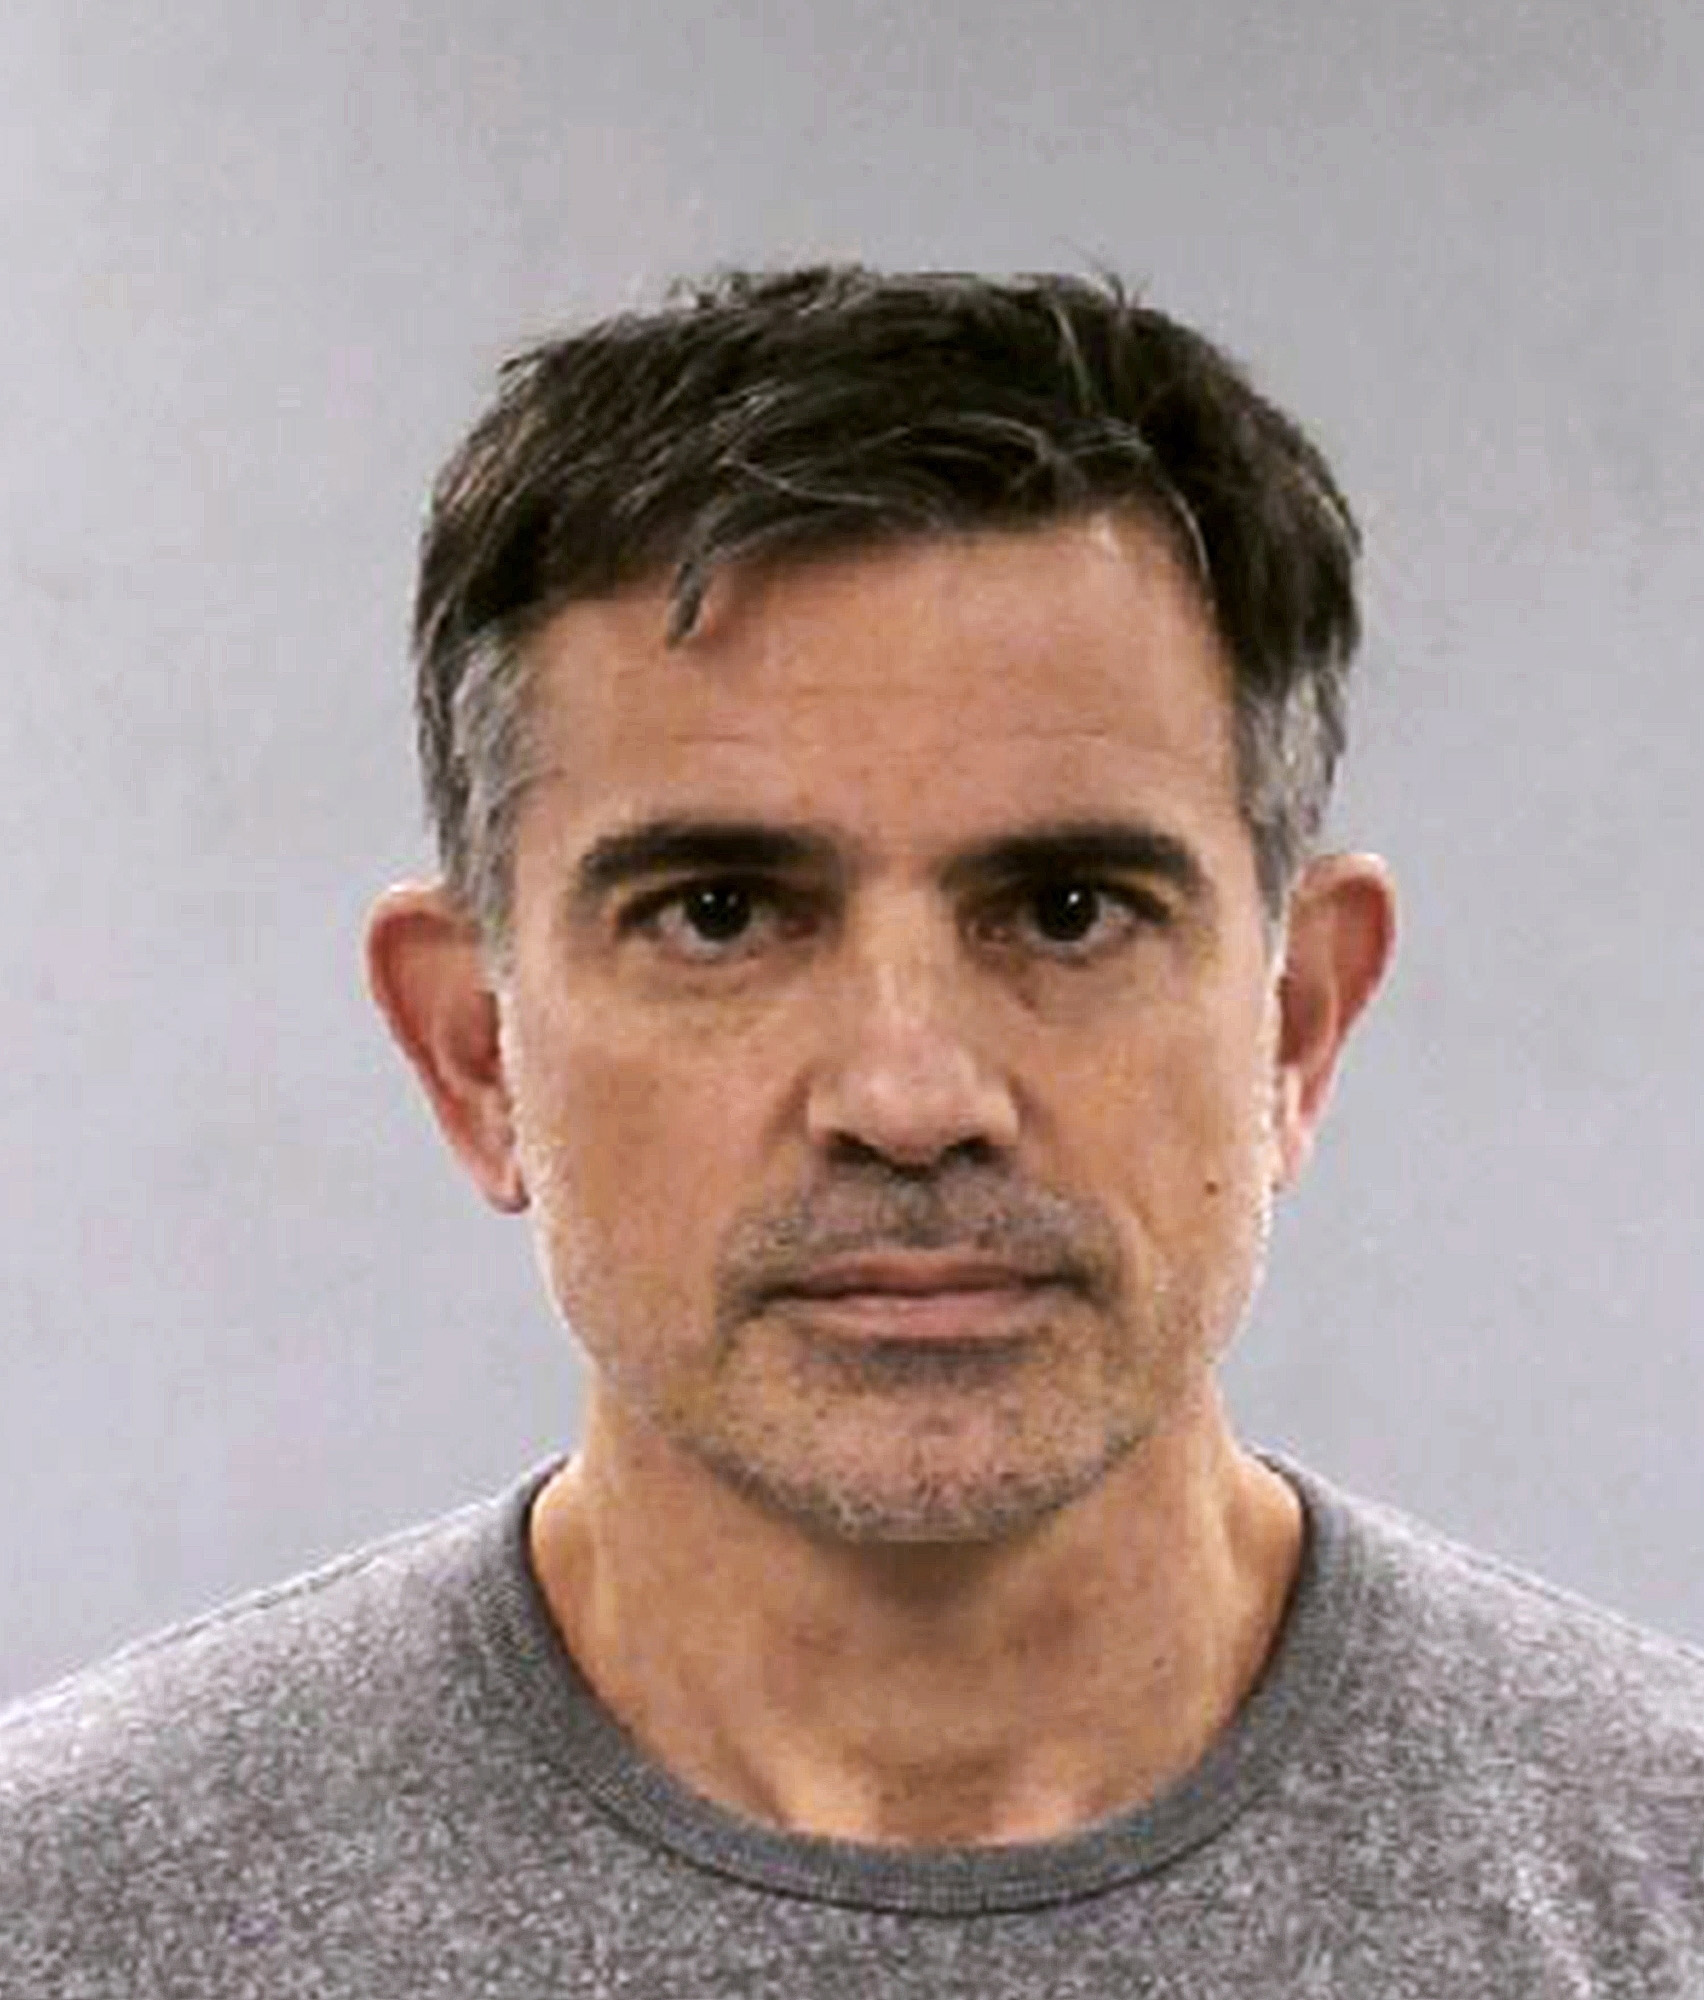 PHOTO: This booking photograph released Tuesday, Jan. 7, 2020, by the Connecticut State Police shows Fotis Dulos, arrested in Farmington, Conn., and charged with murder of his estranged wife Jennifer Dulos, who went missing in May 2019.